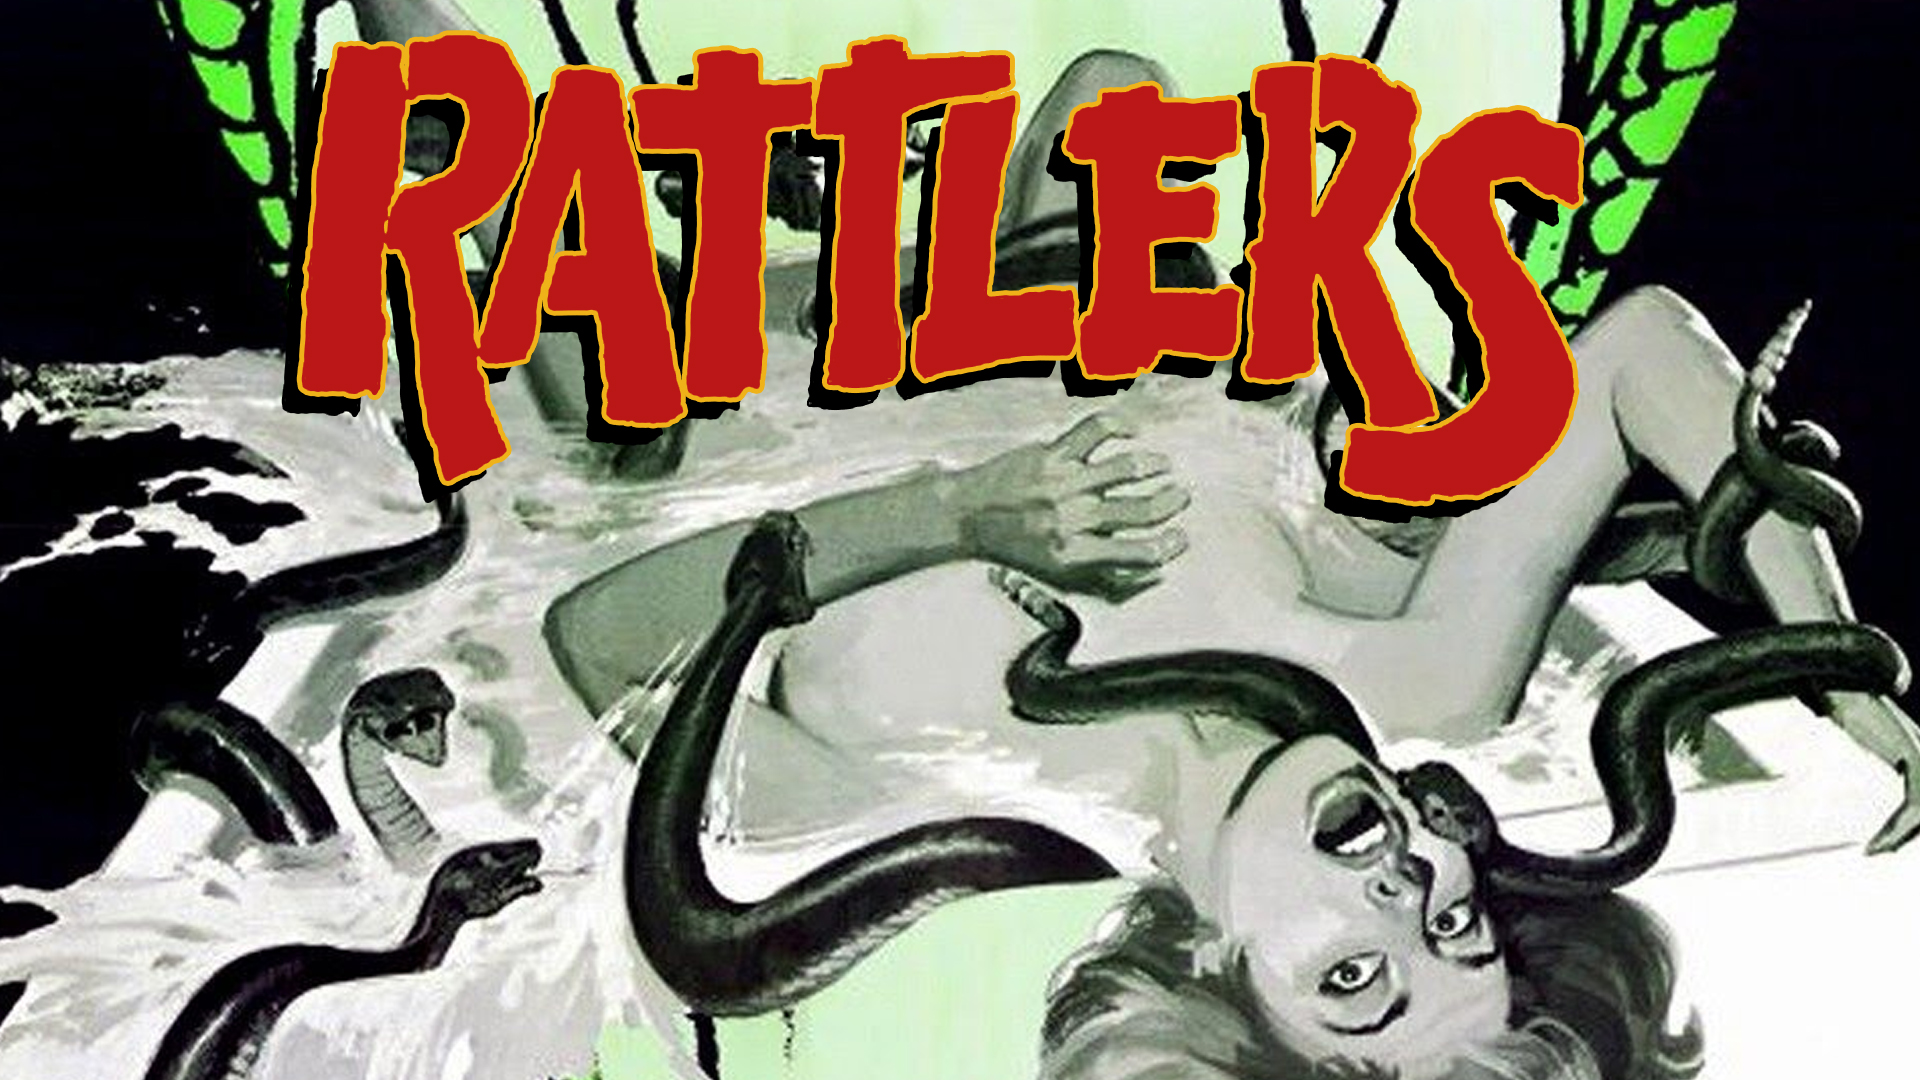 Rattlers (1976)